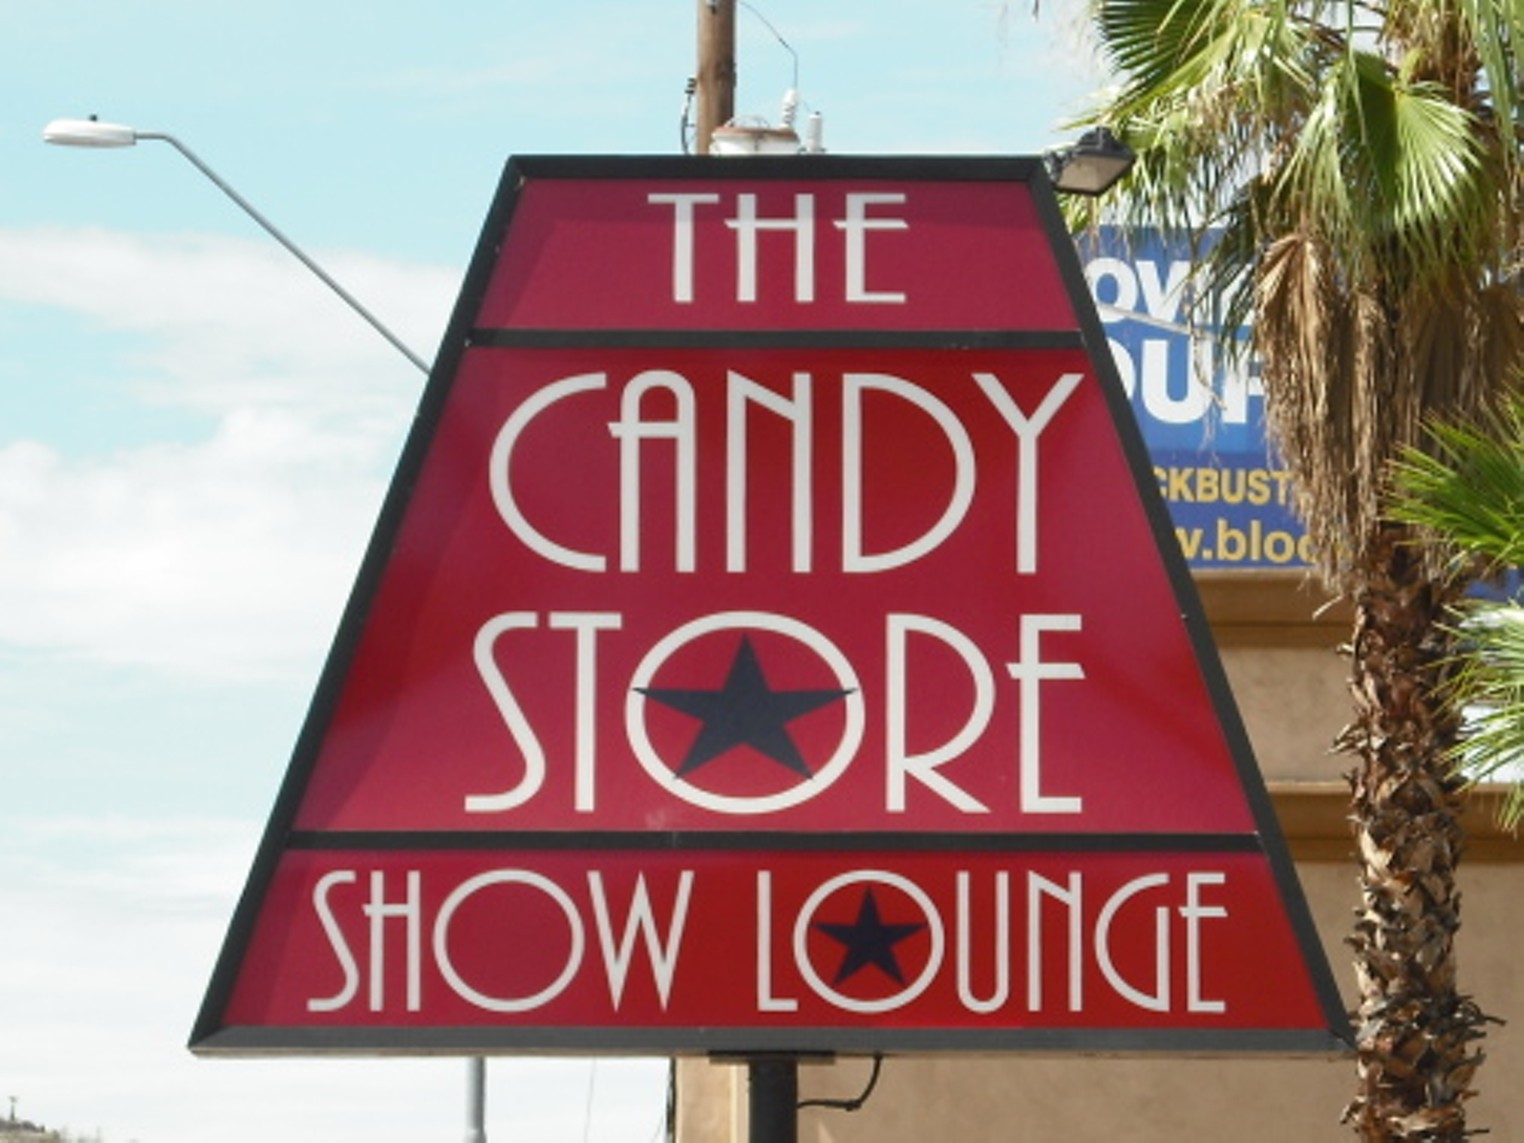 Best Strip Club 2013 The Candy Store Bars and Clubs Phoenix pic photo